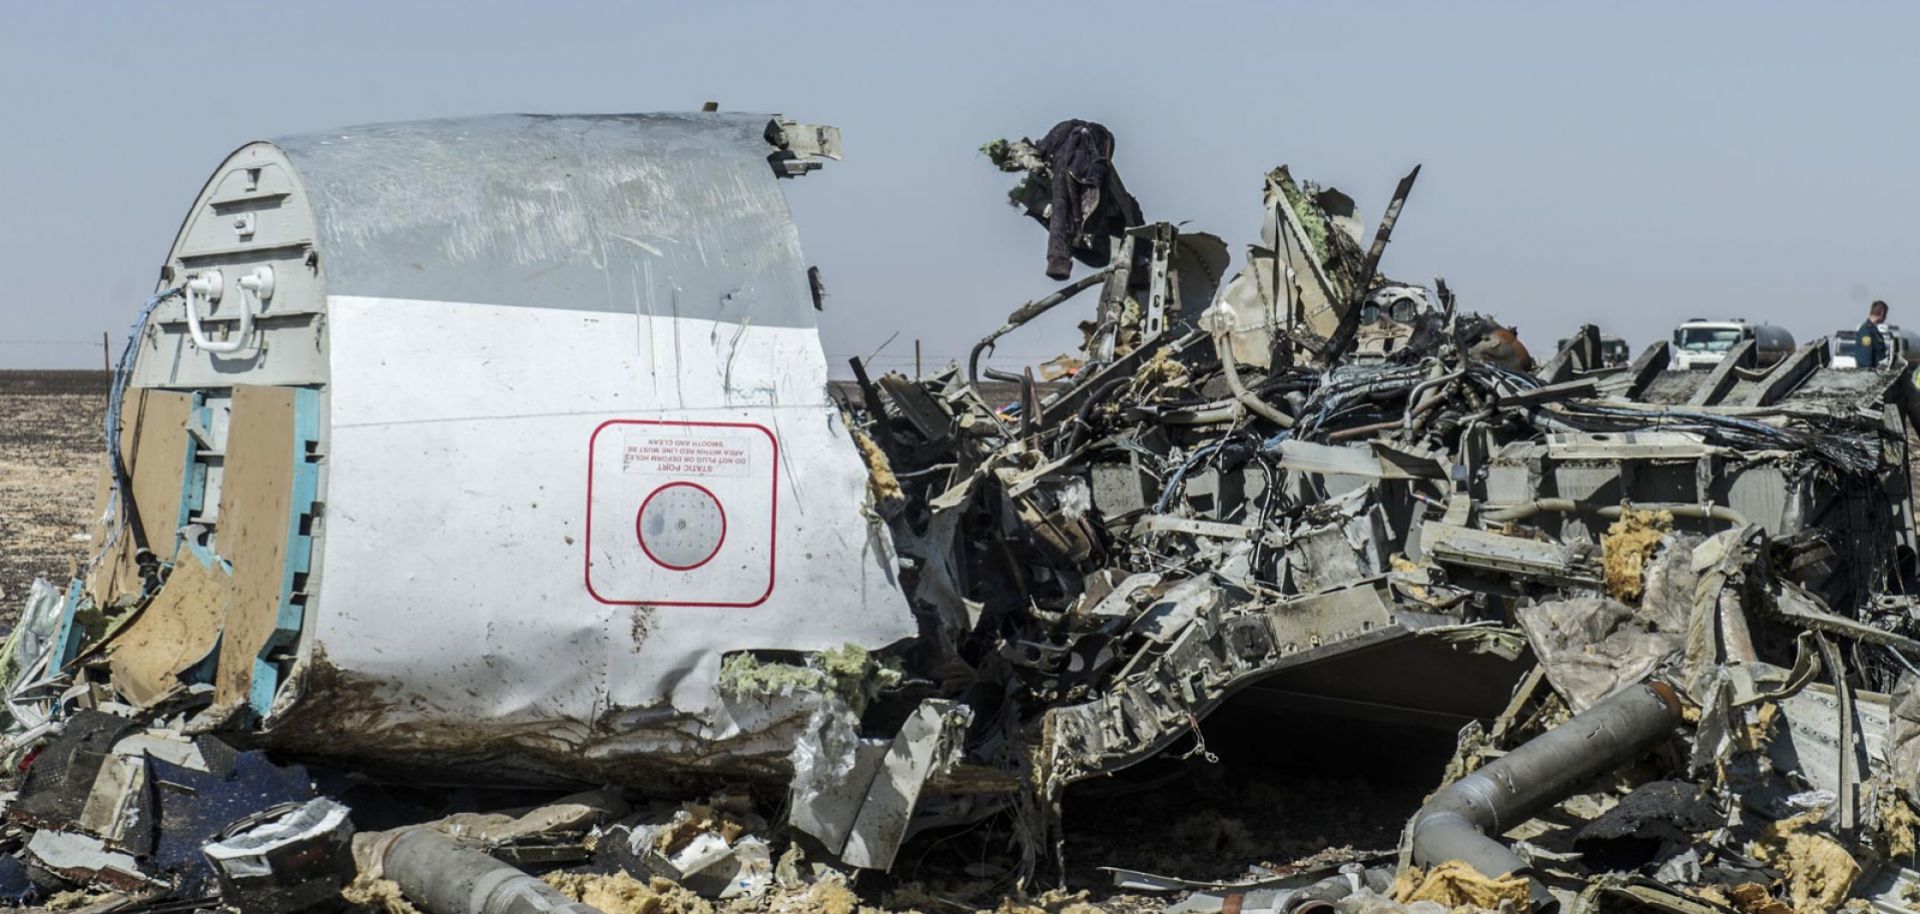 A bomb appears to have downed Metrojet Flight 9268 and many fear the Islamic State may have been behind it